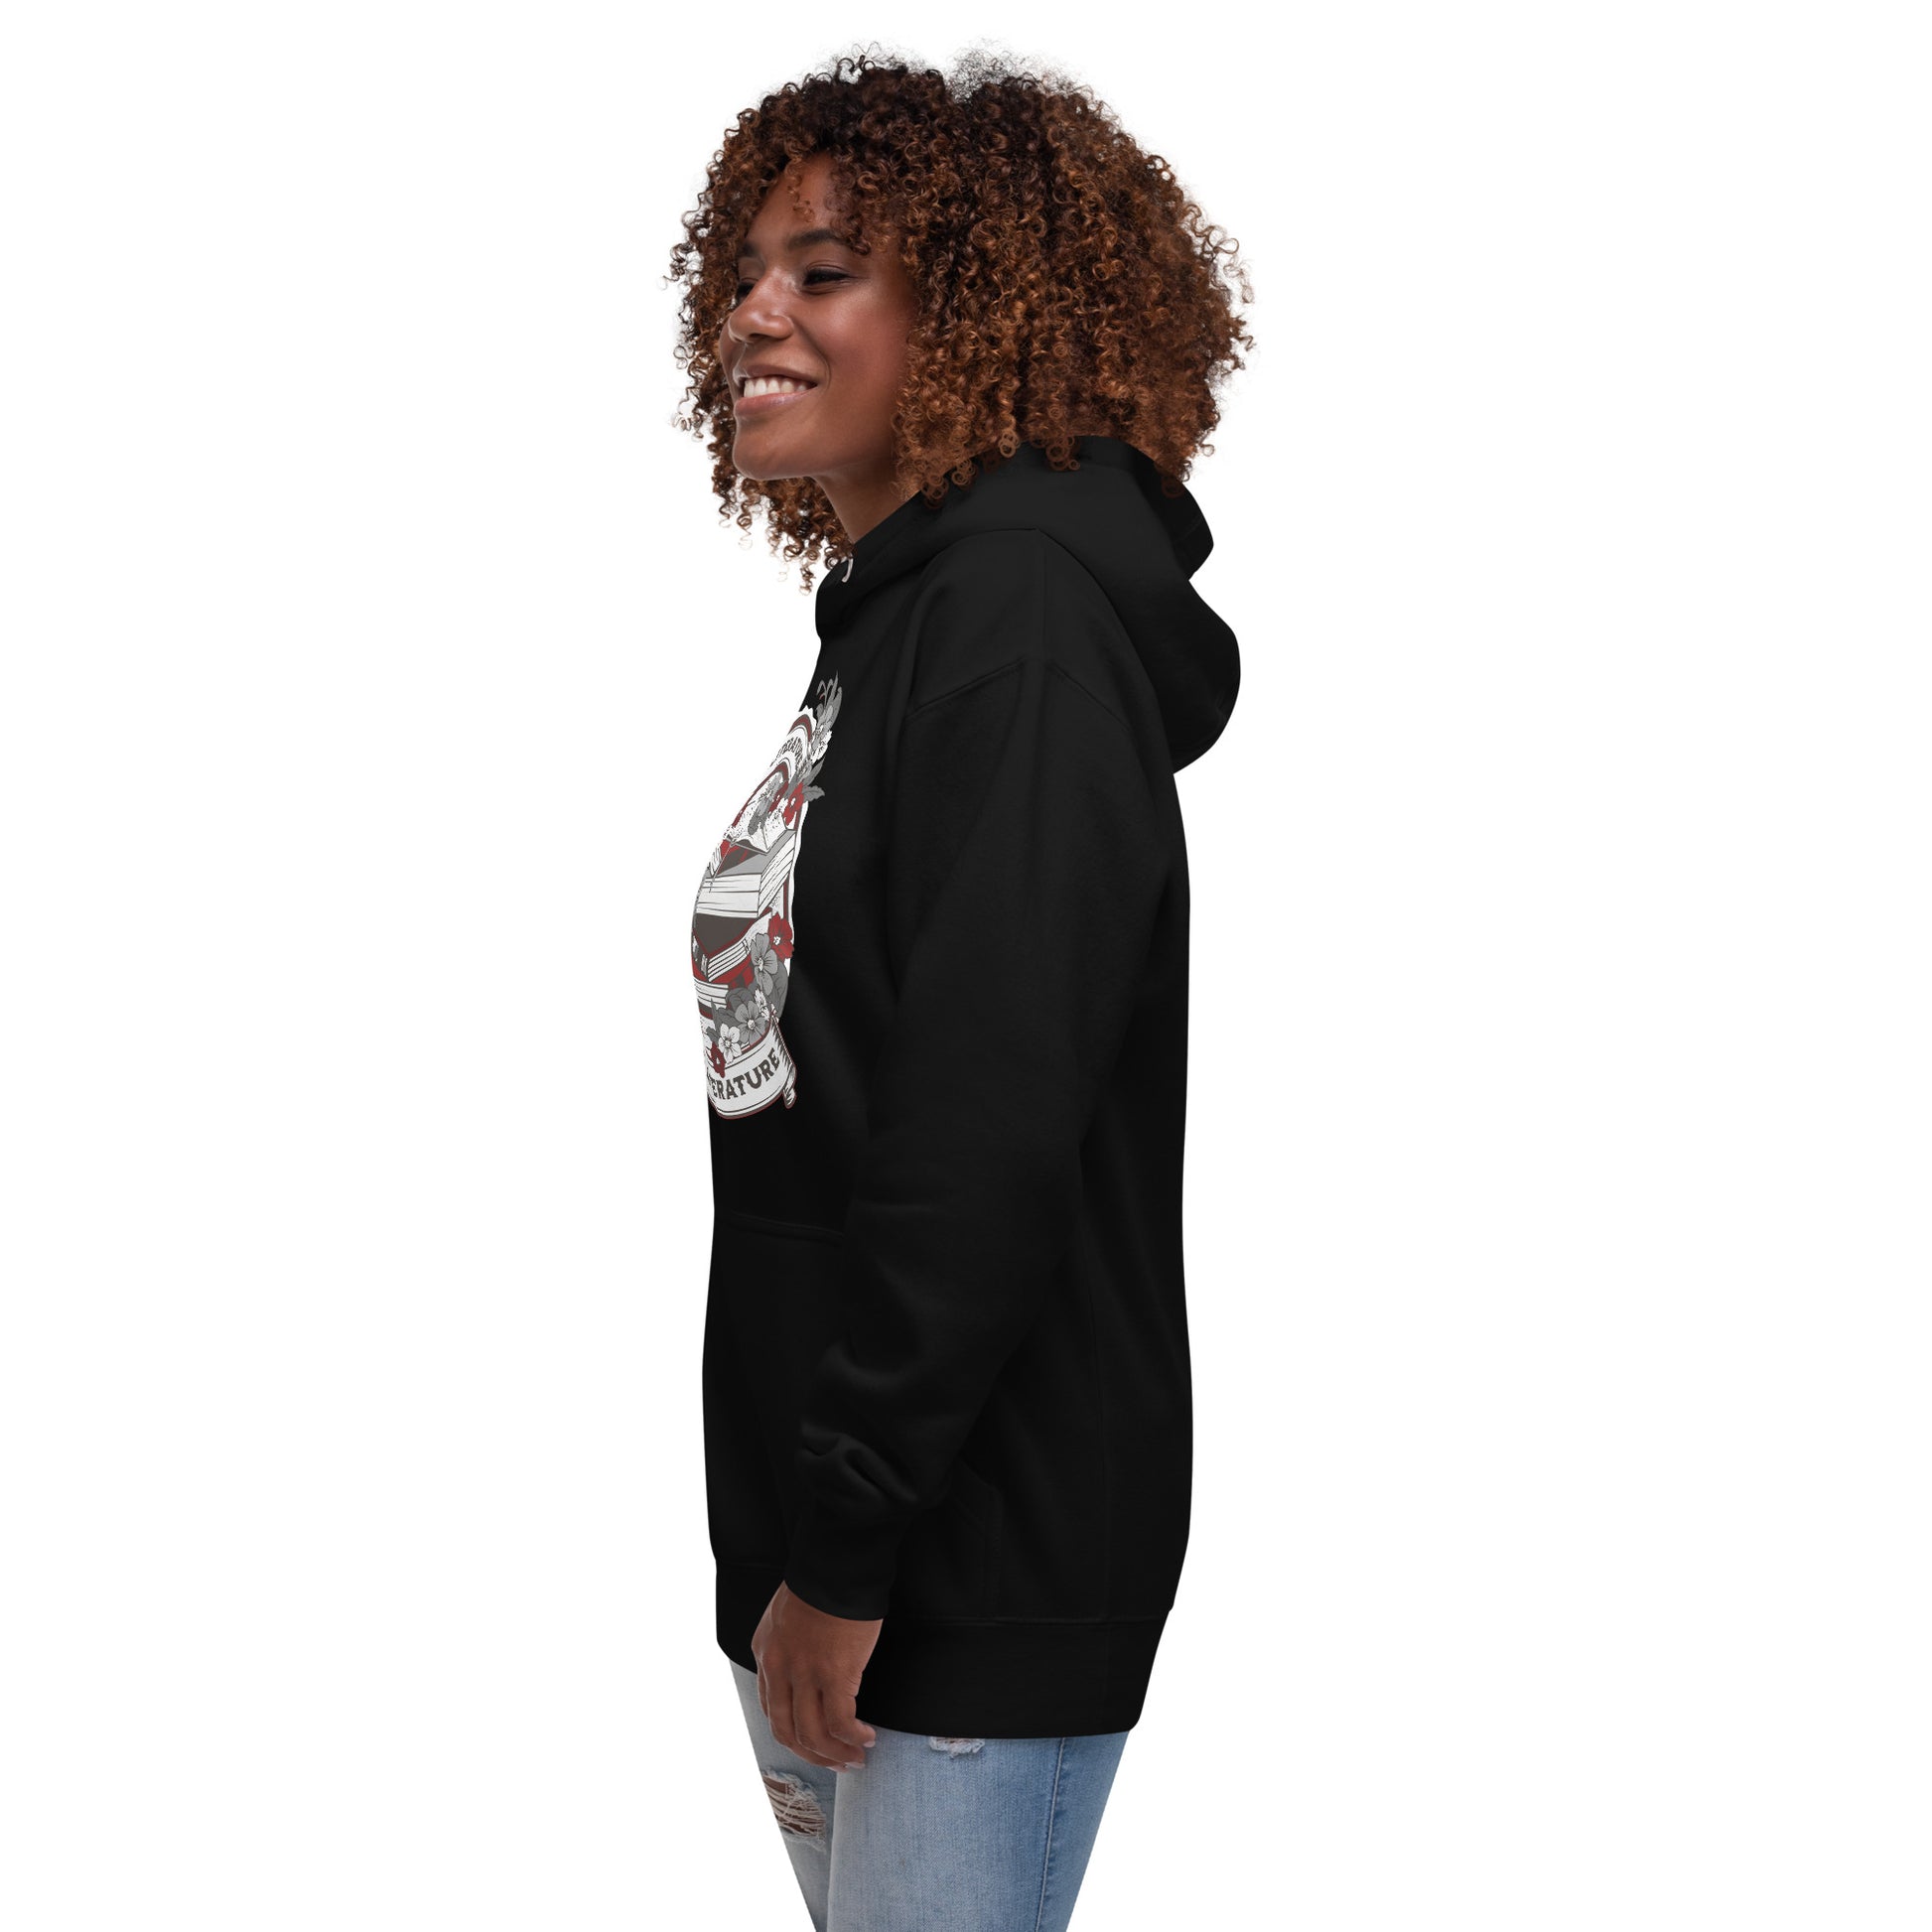 Cliterature is Literature Dark Bookstack Unisex Hoodie *NEW BRAND - CHECK SIZING* for FireDrake Artistry